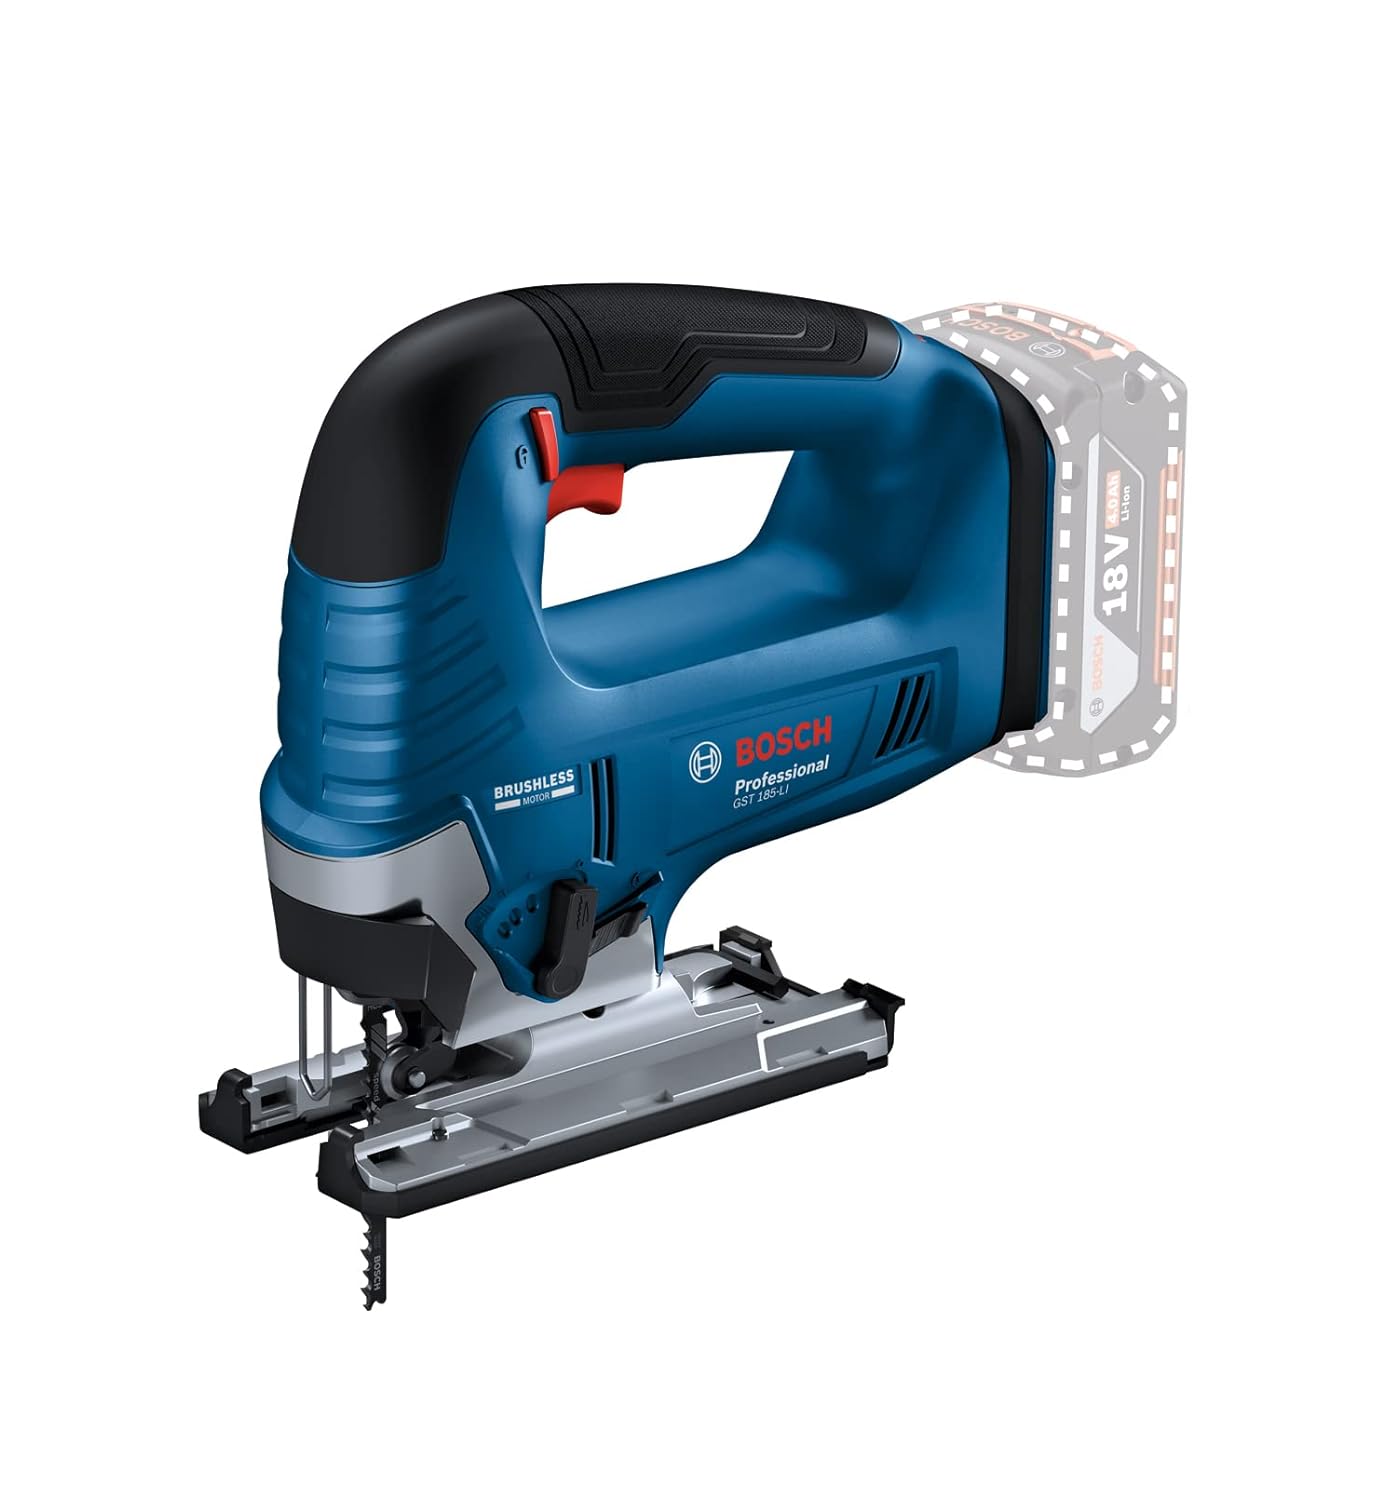 Bosch GST 185-Li Professional Cordless Jigsaw, 18V, 125 mm Cutting Depth, Dust Extraction, 2 kg + Carrying case, 1 x jigsaw blade (Solo Tool - 18V Batteries & Charger sold seperately)